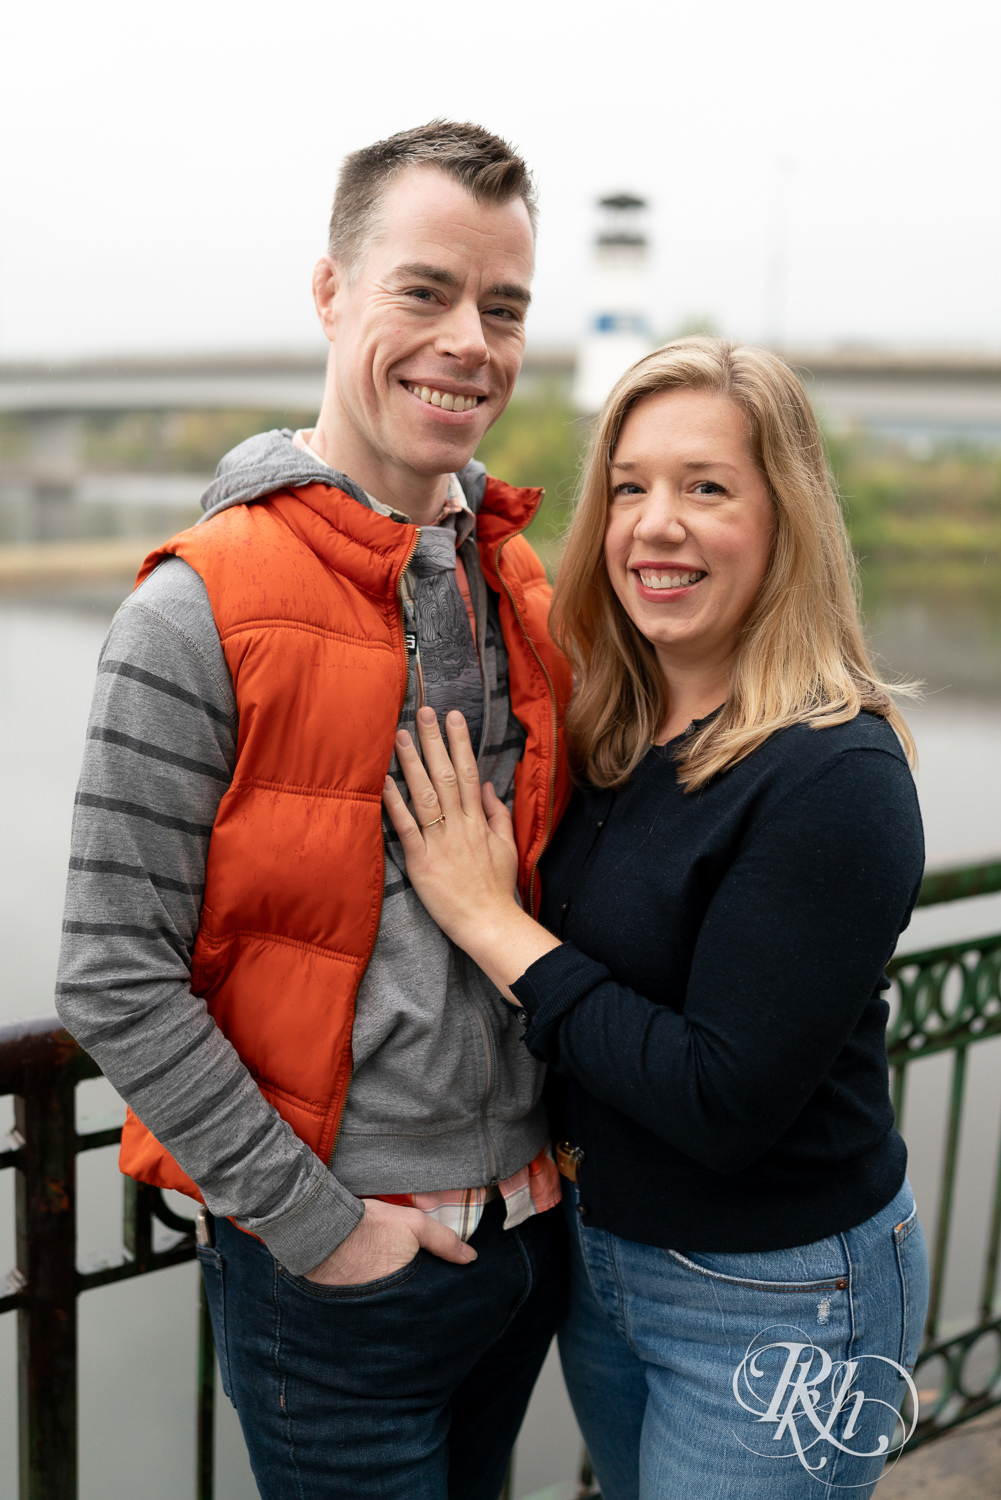 Man and woman in hoodies and jeans smile during rainy engagement photos at Boom Island Park in Minneapolis, Minnesota.